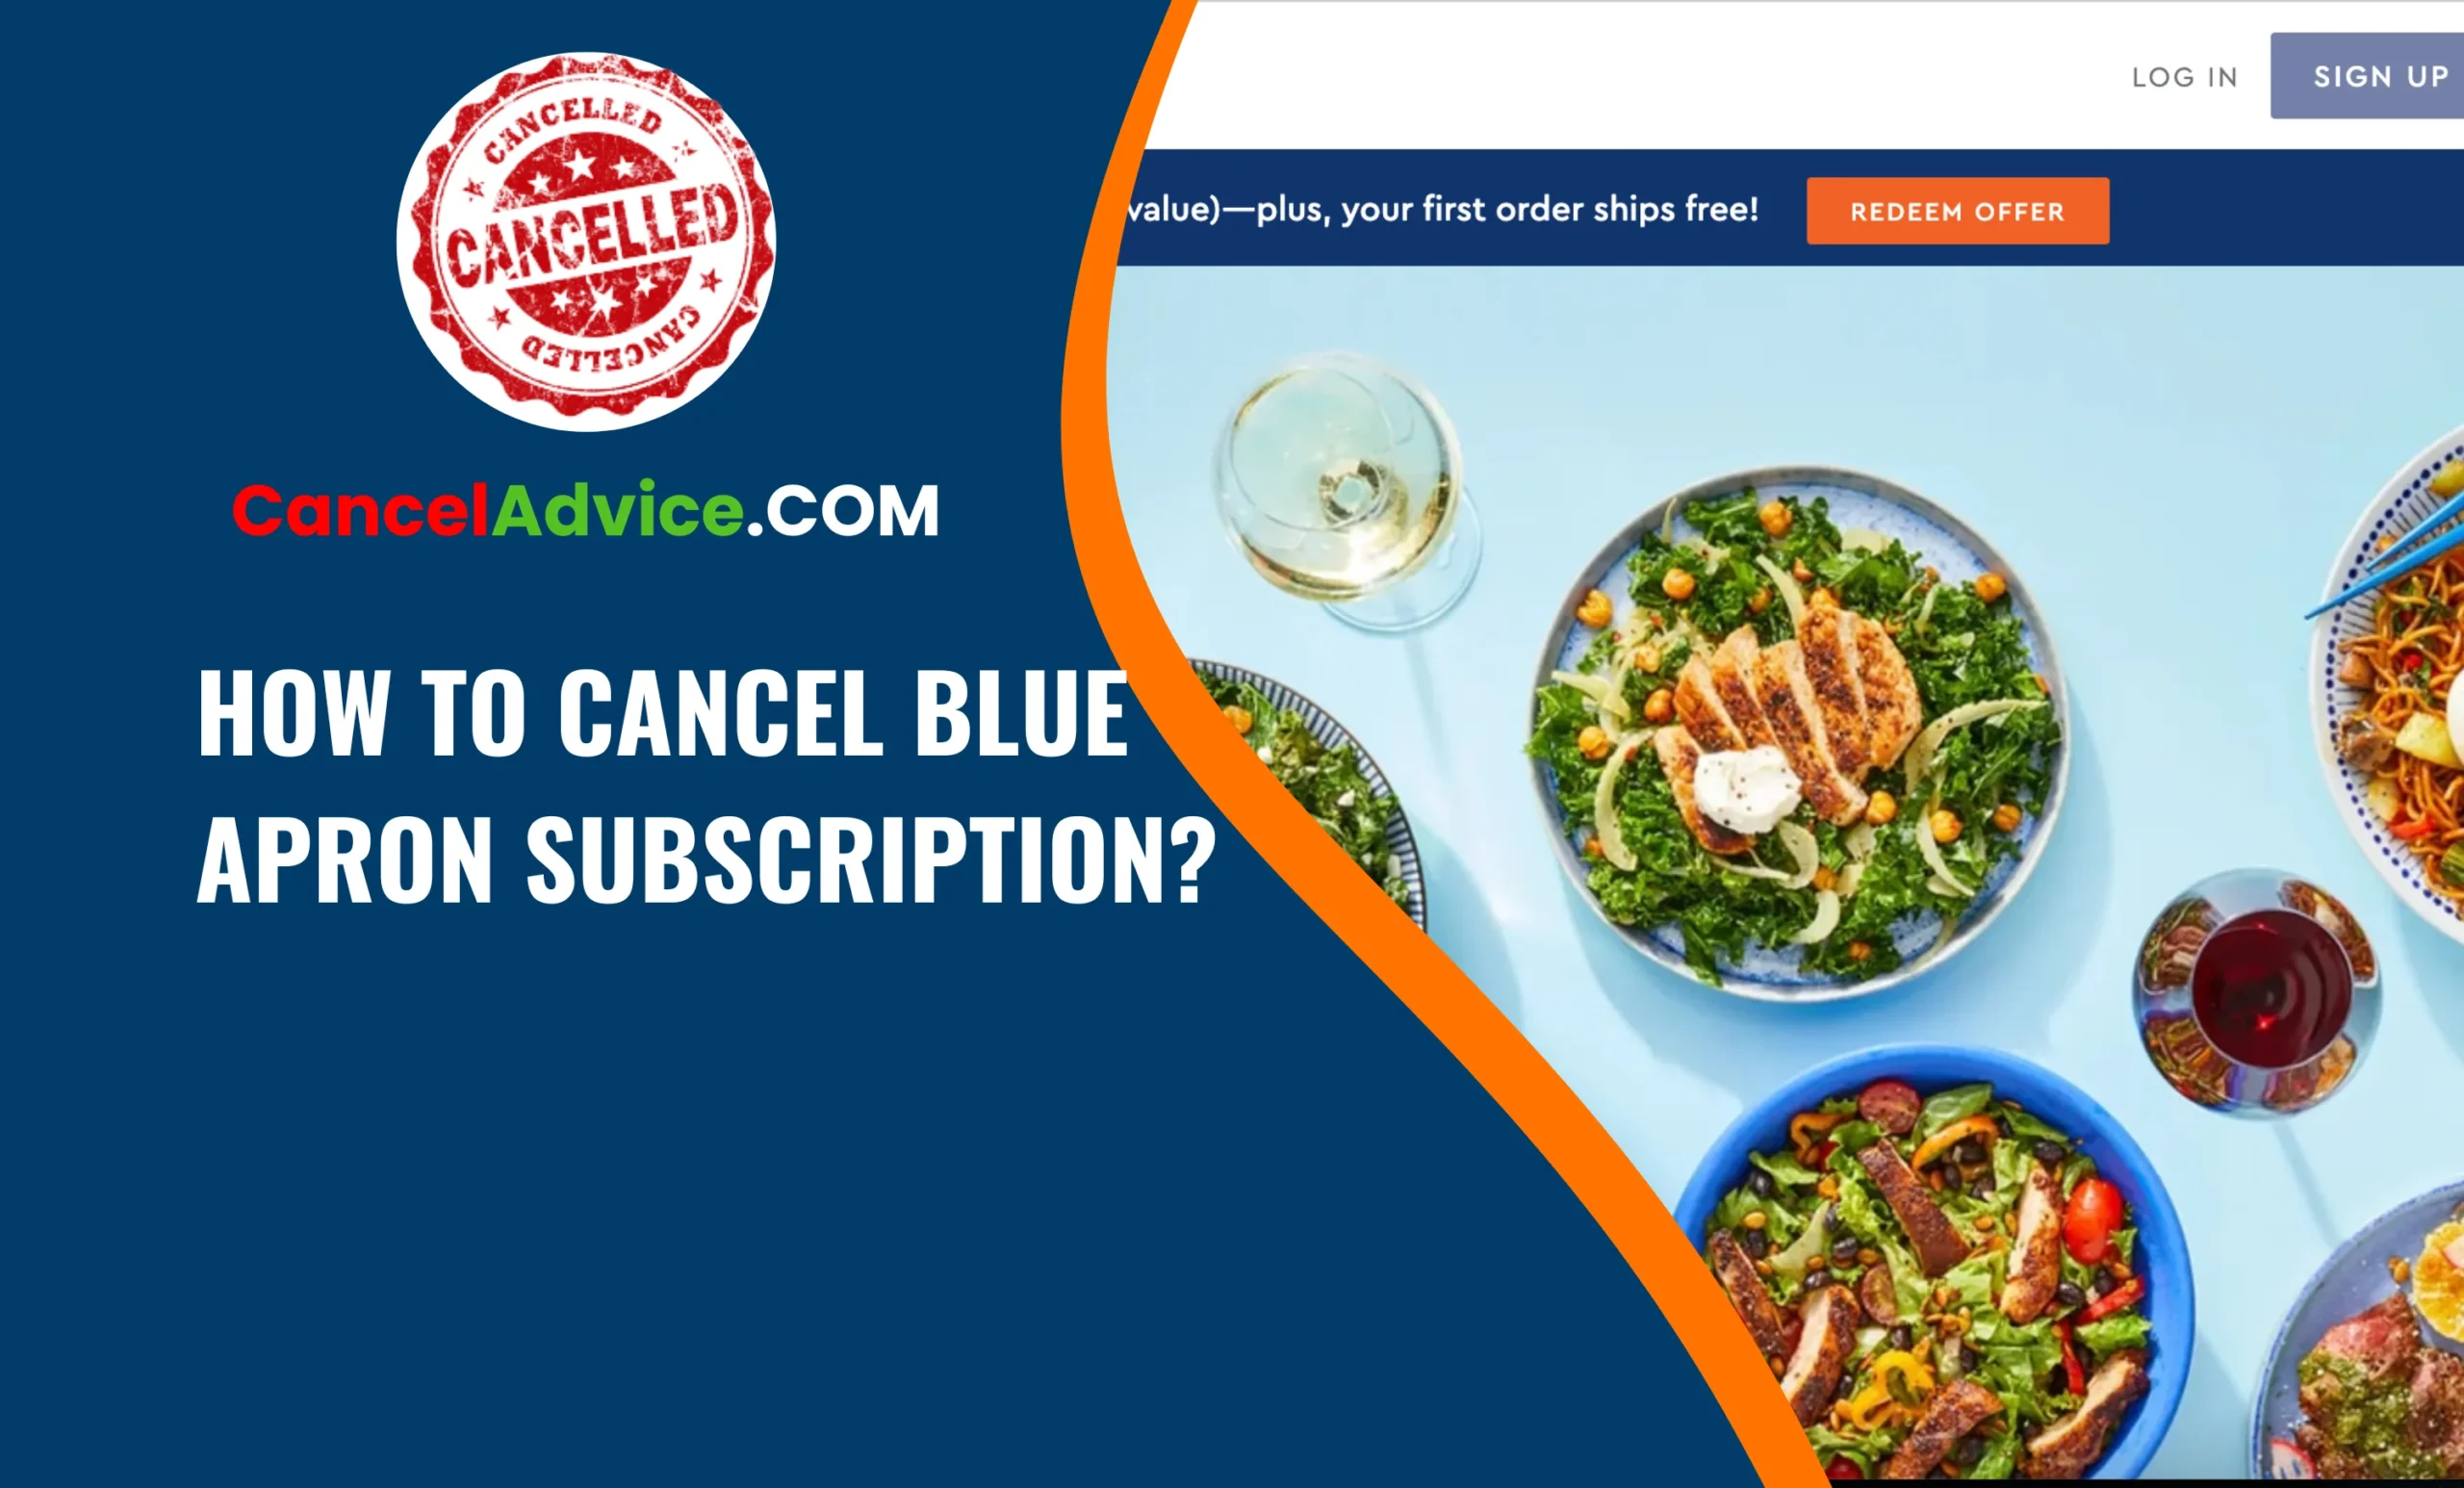 How to Cancel Blue Apron Subscription